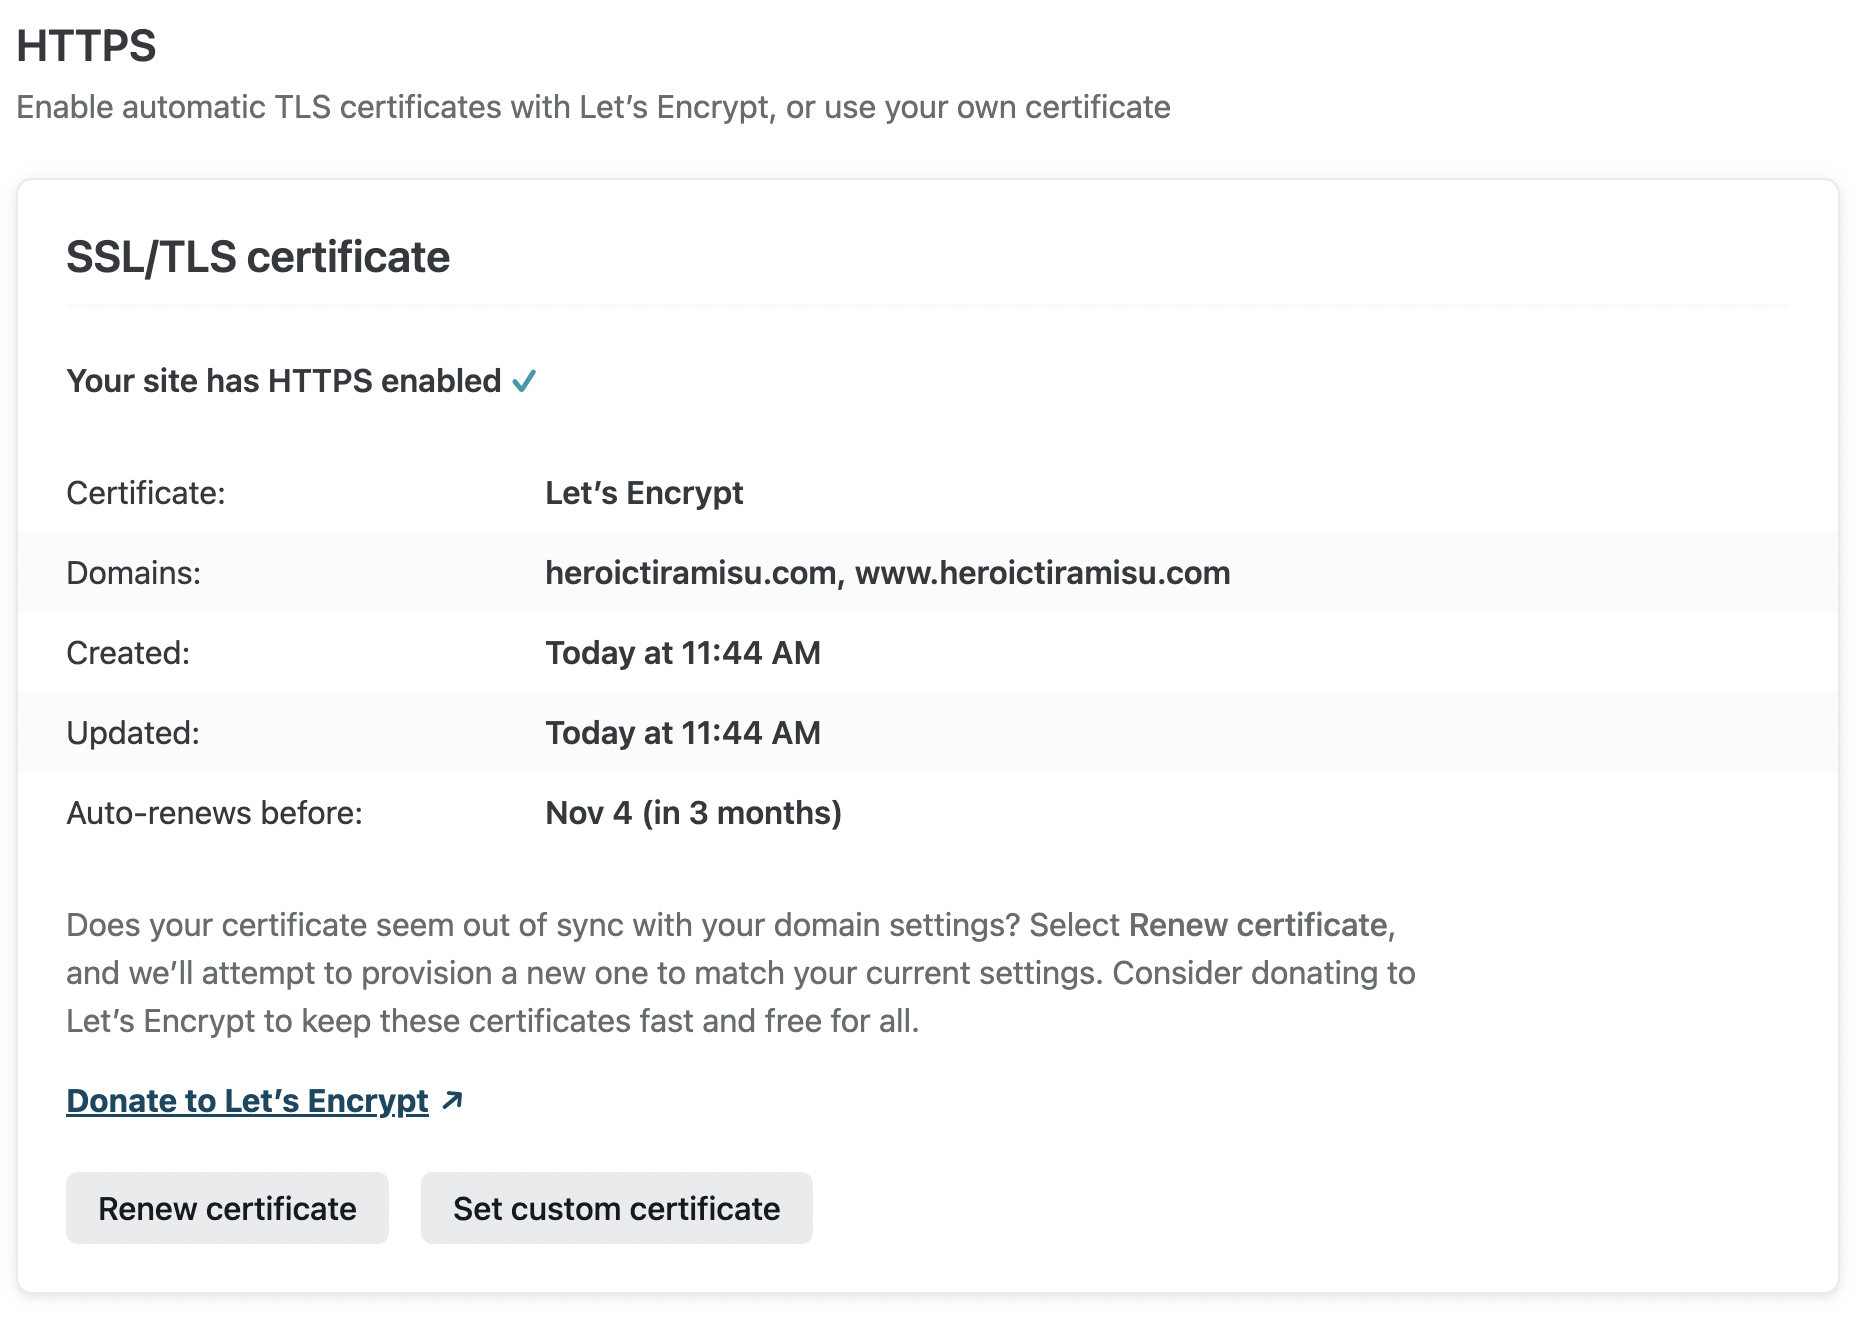 The issued TLS certificate in Netlify